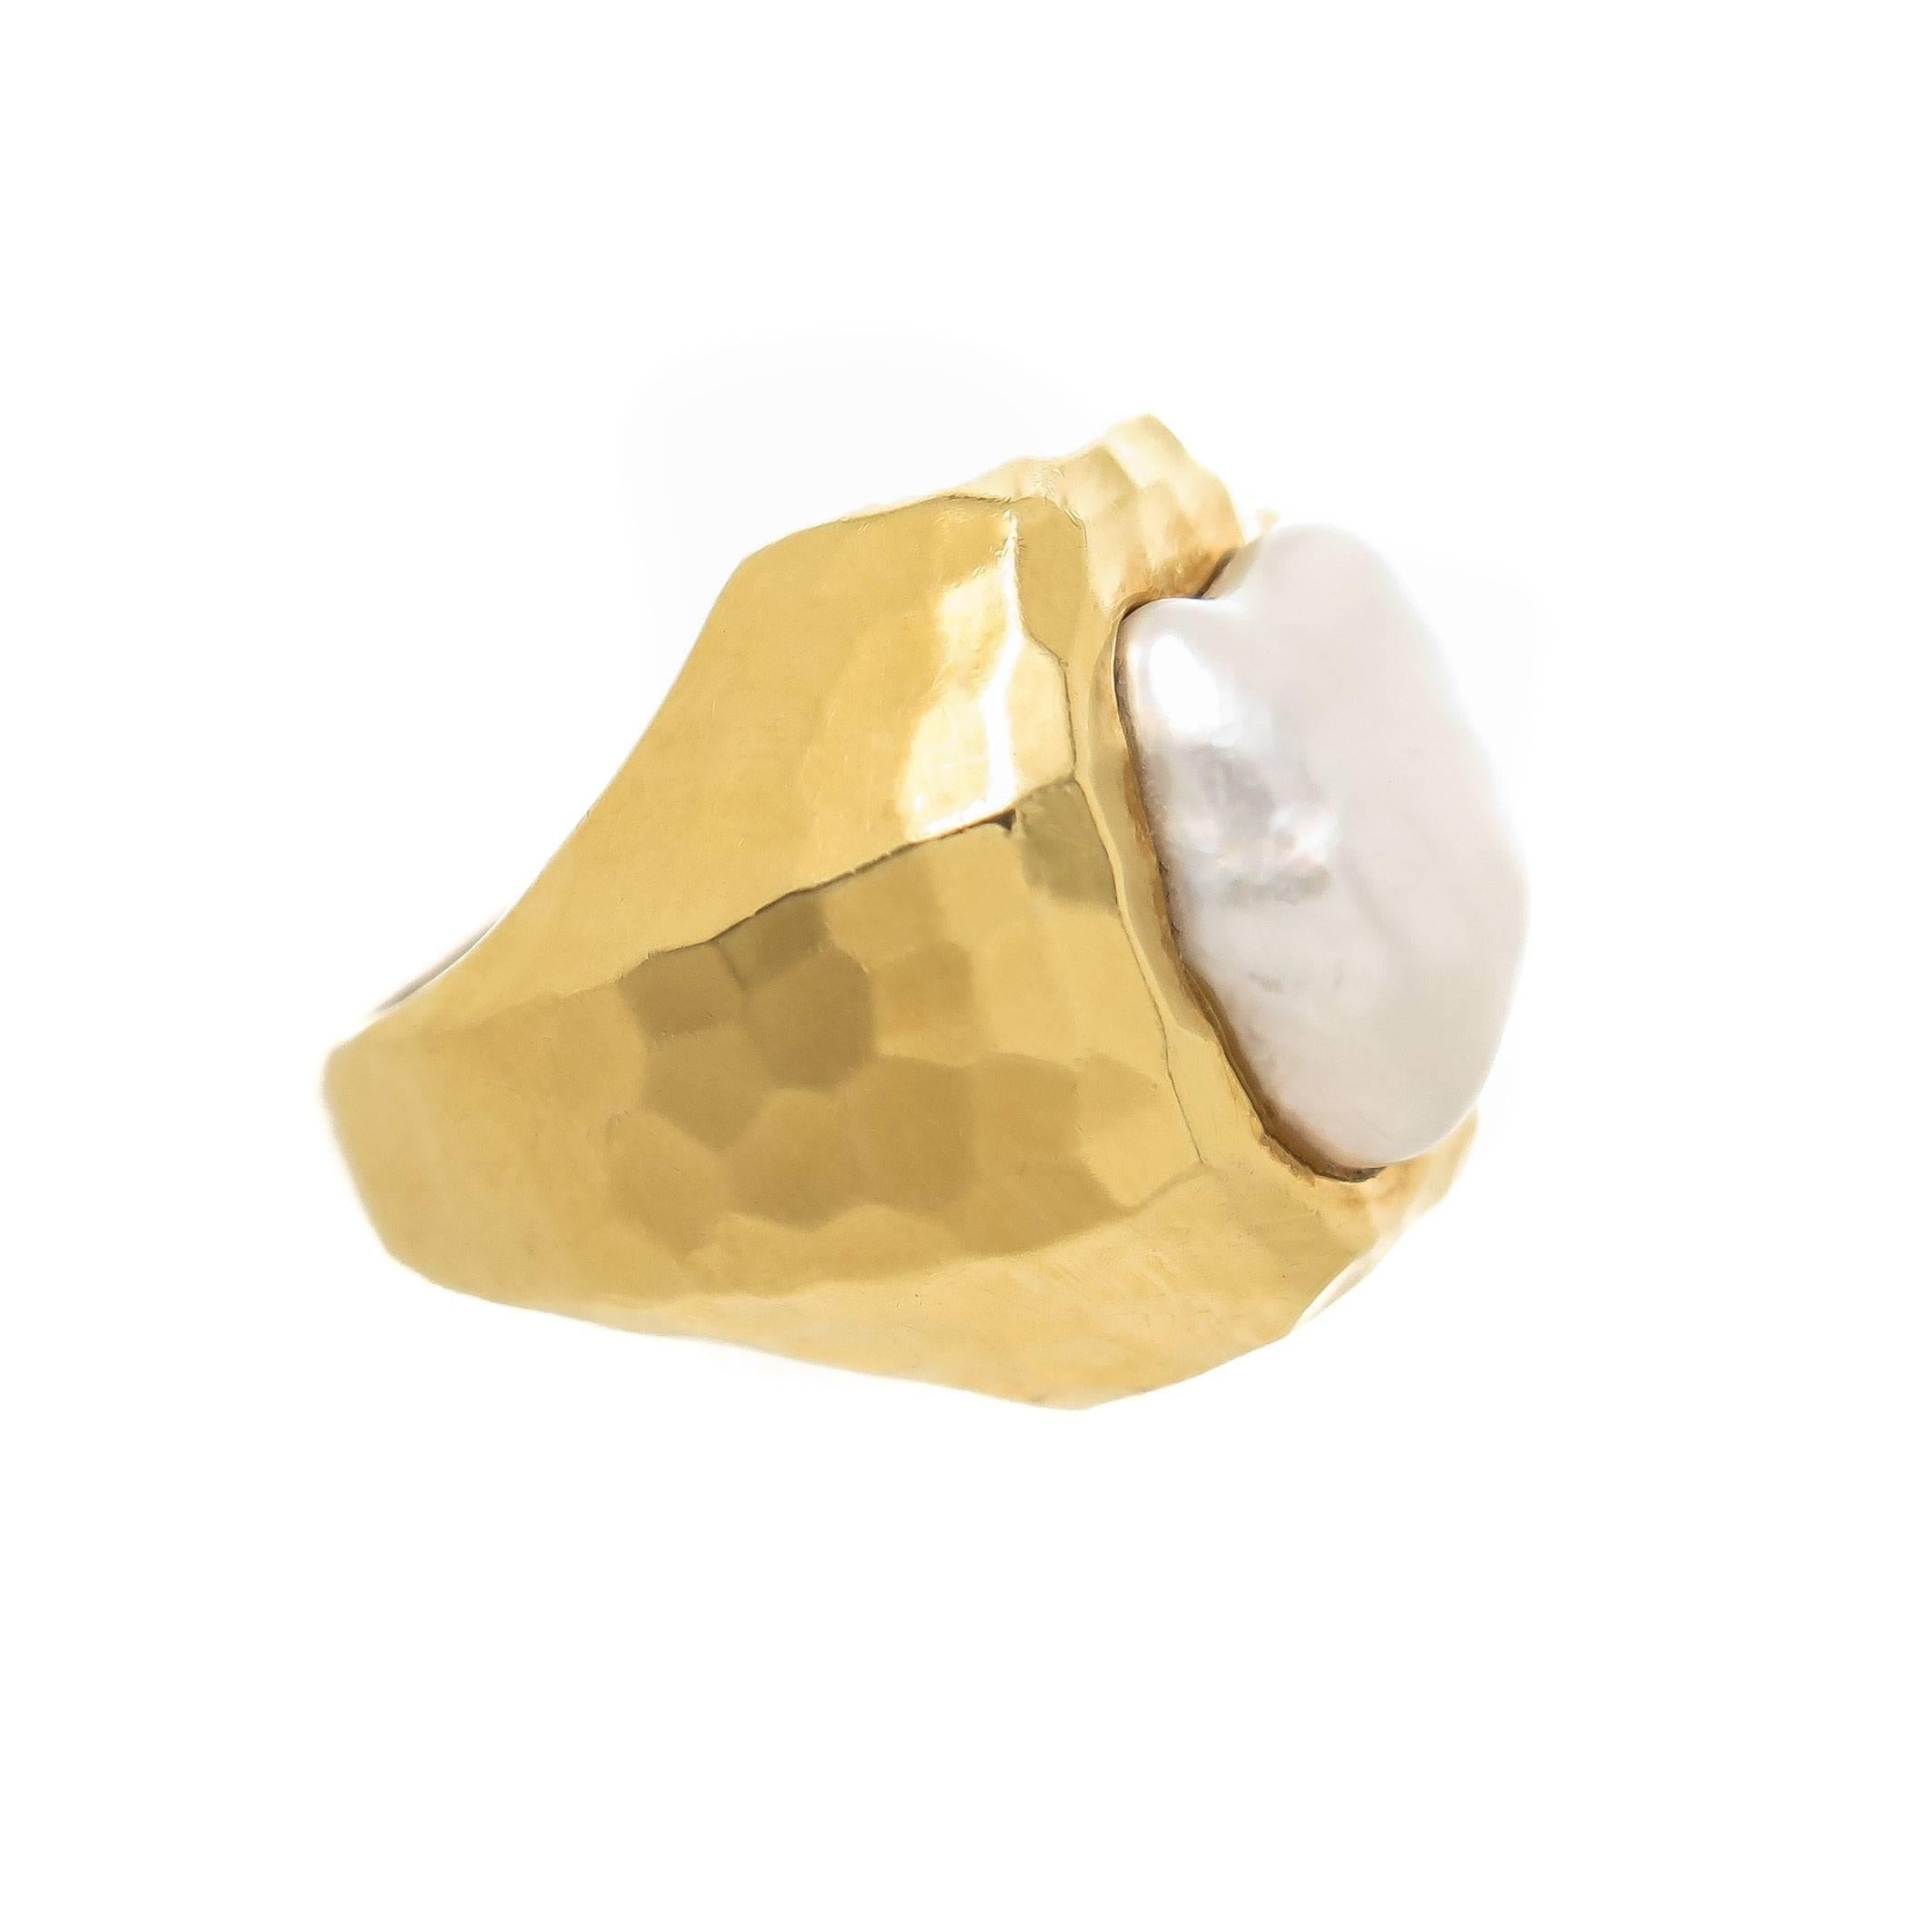 Circa 2000 Henry Dunay 18k Yellow Gold hand hammered ring. Having a nice solid and heavy make, 23.3 Grams. Centrally set with a Natural Fresh Water pearl. The top of the ring measures 3/4 X 3/4 inch. Finger size = 5 1/2 